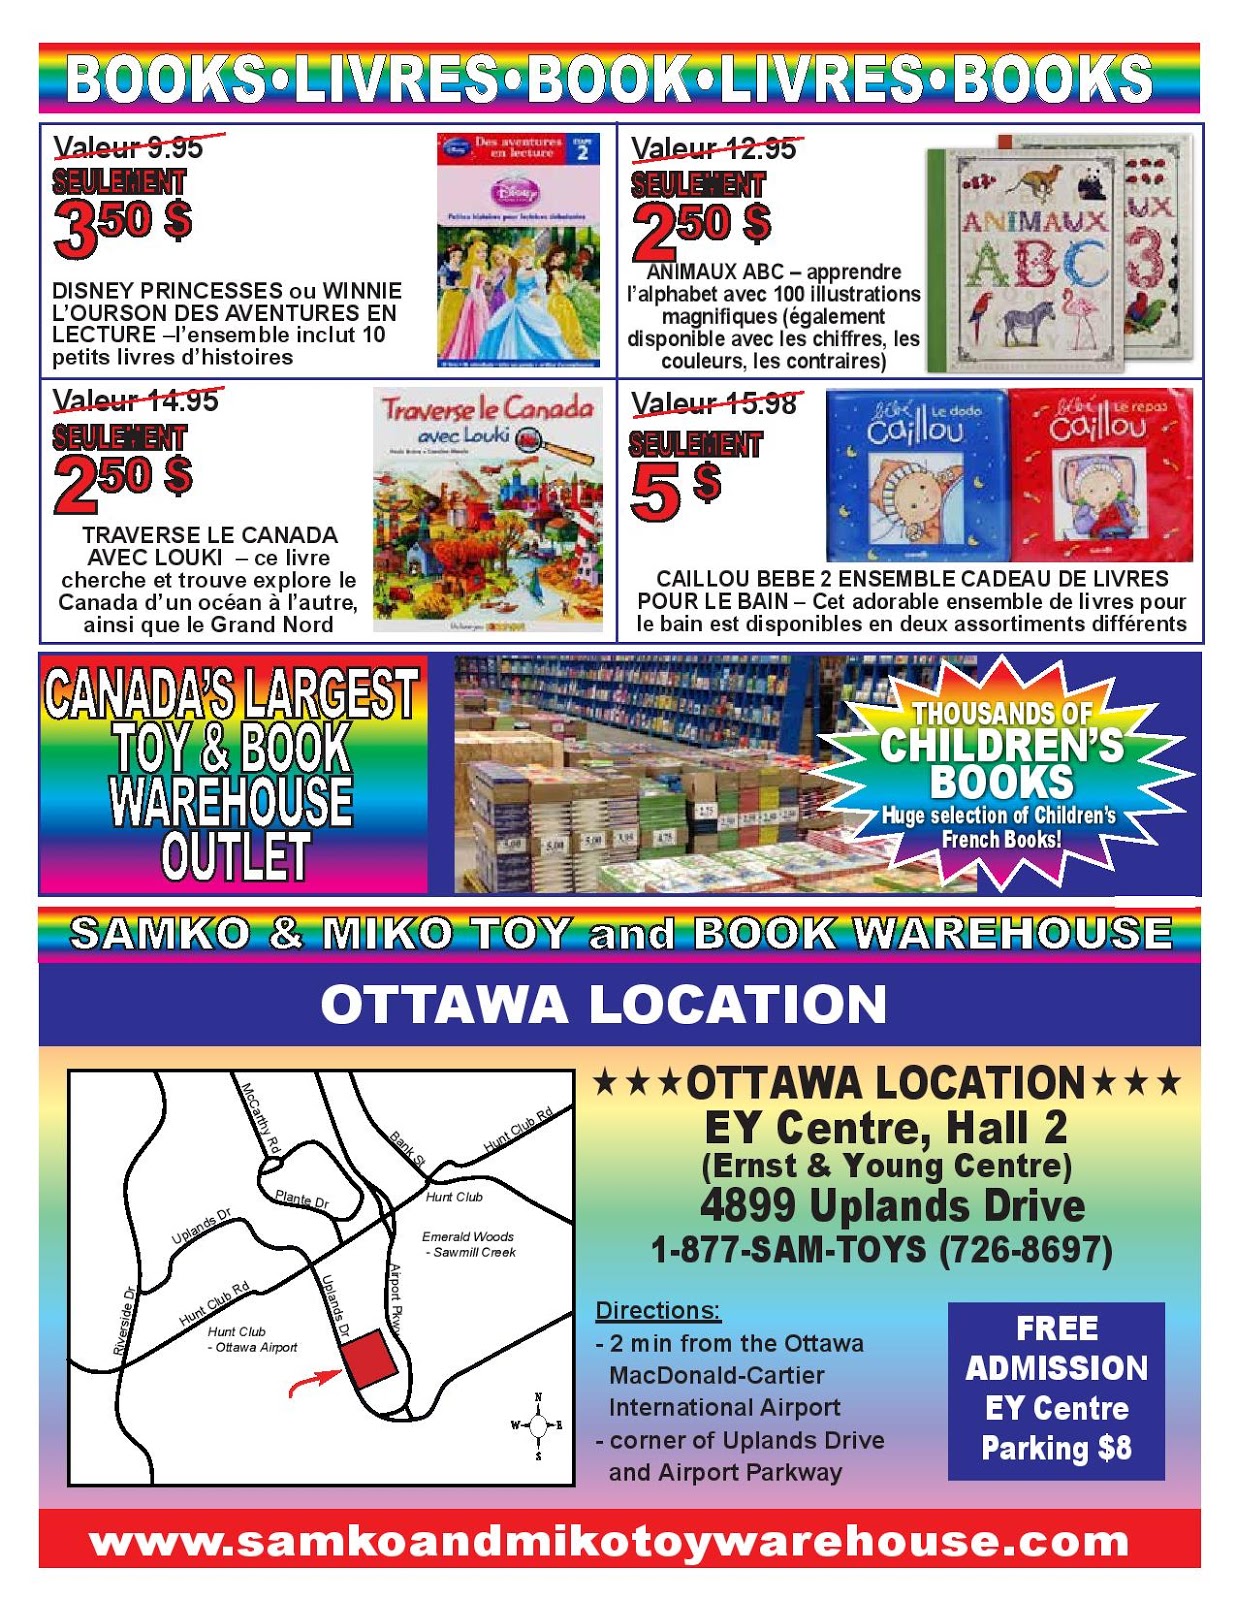 Things To Do with the Kids in Ottawa: Samko and Miko Flyer 20151236 x 1600